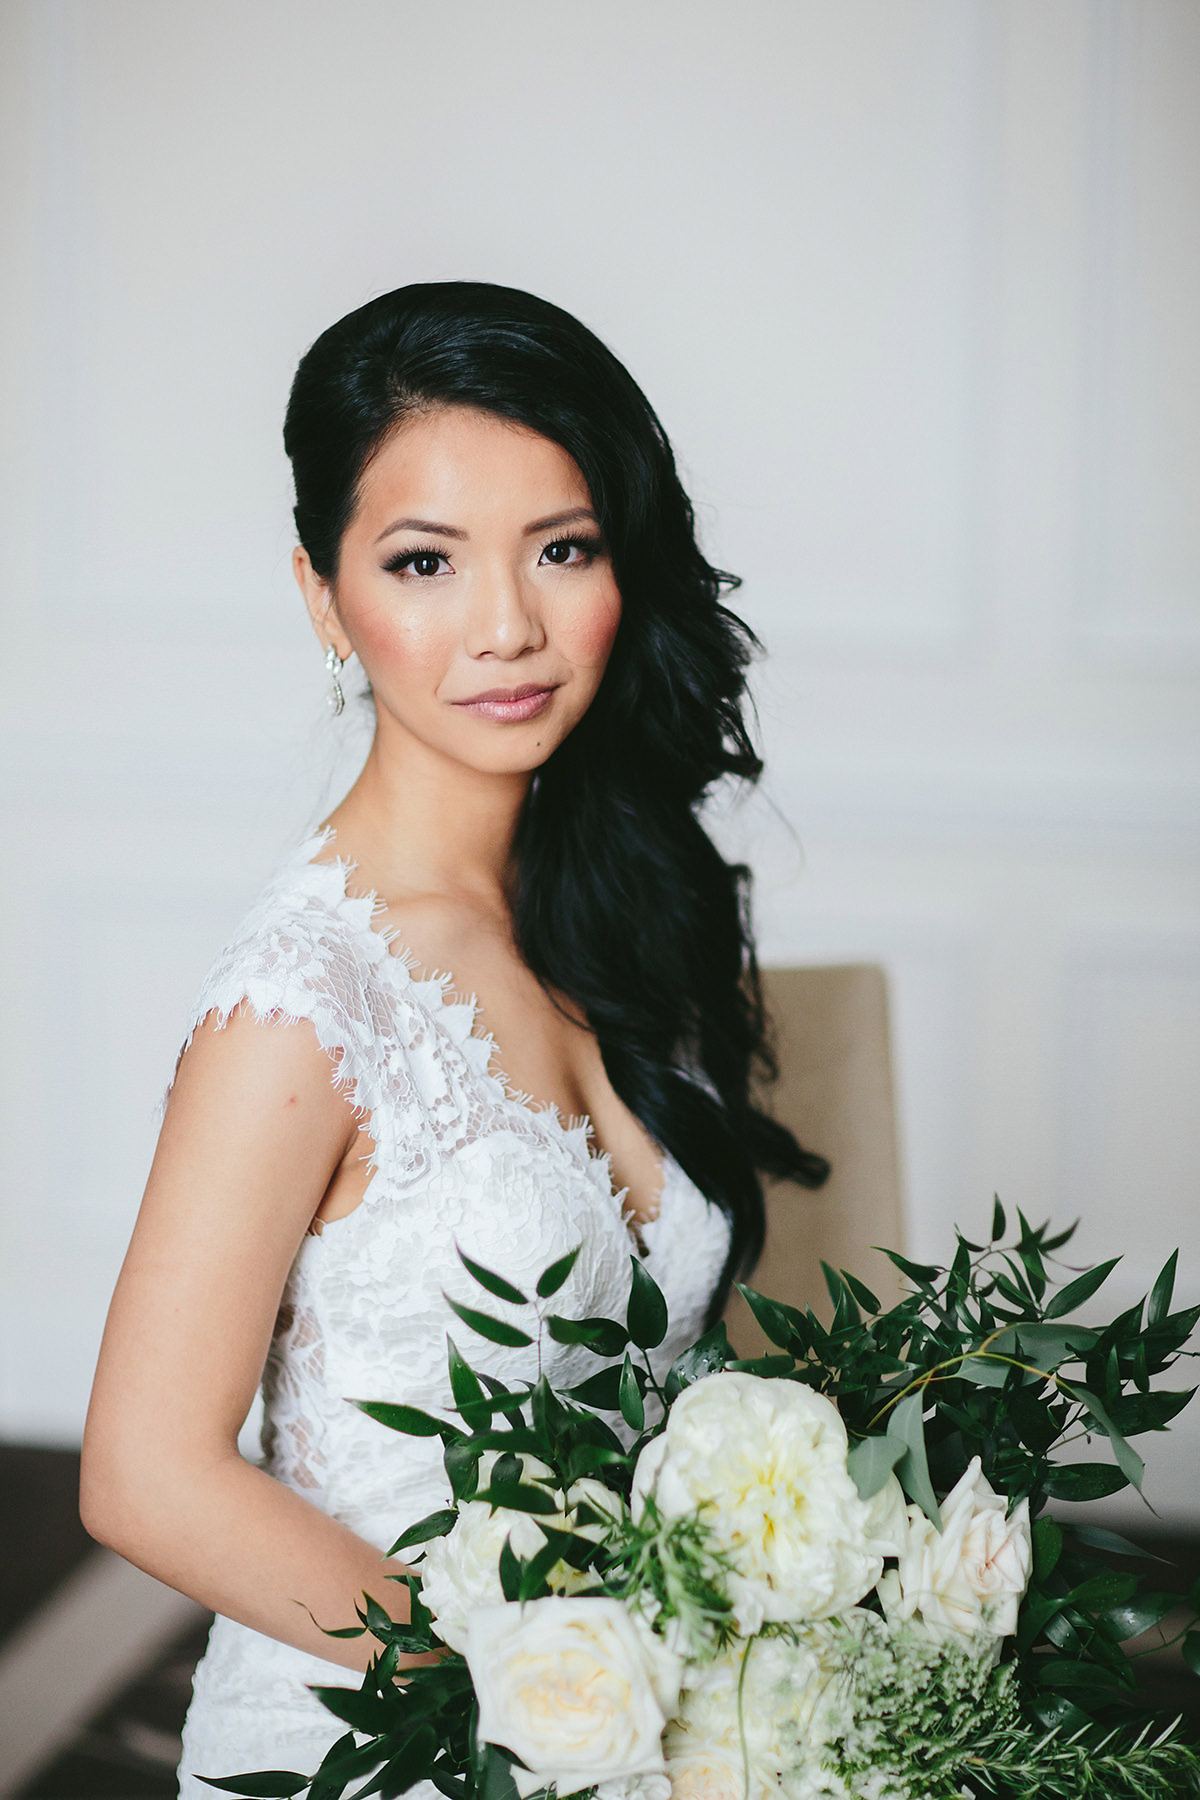 Vancouver Bride Featuring Jewelry by Elsa Corsi